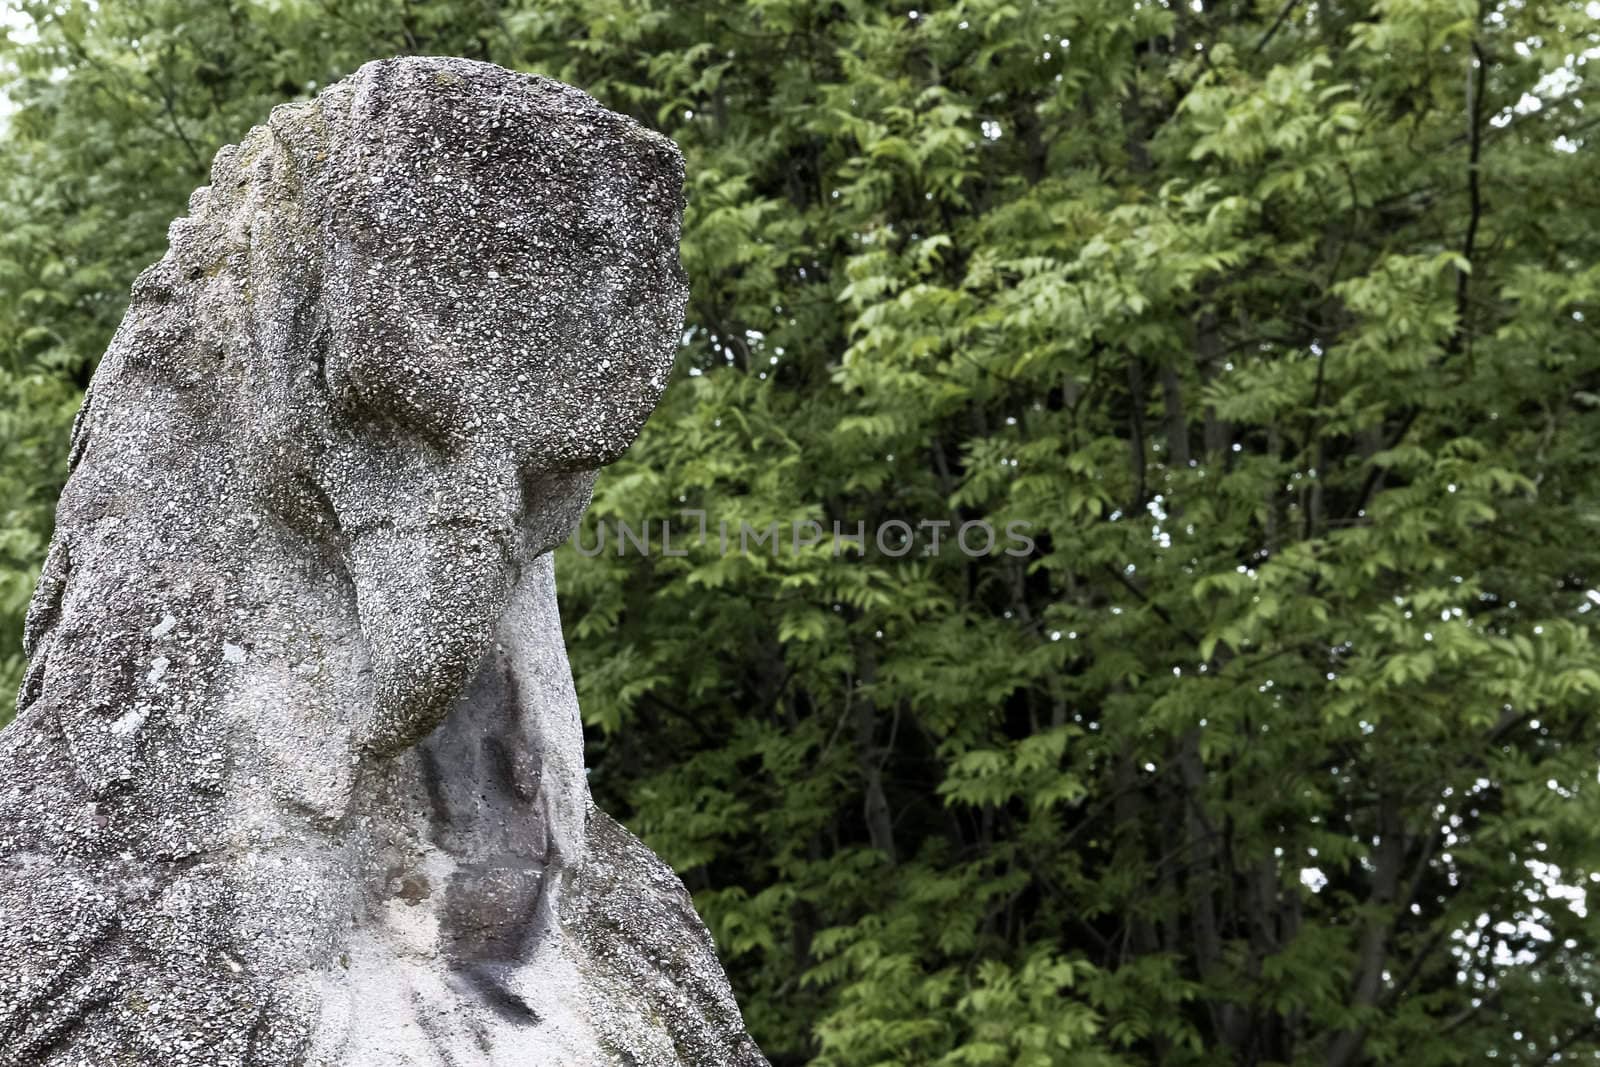 A bird-statue made out of stone on a grave in Vienna's central cemetery